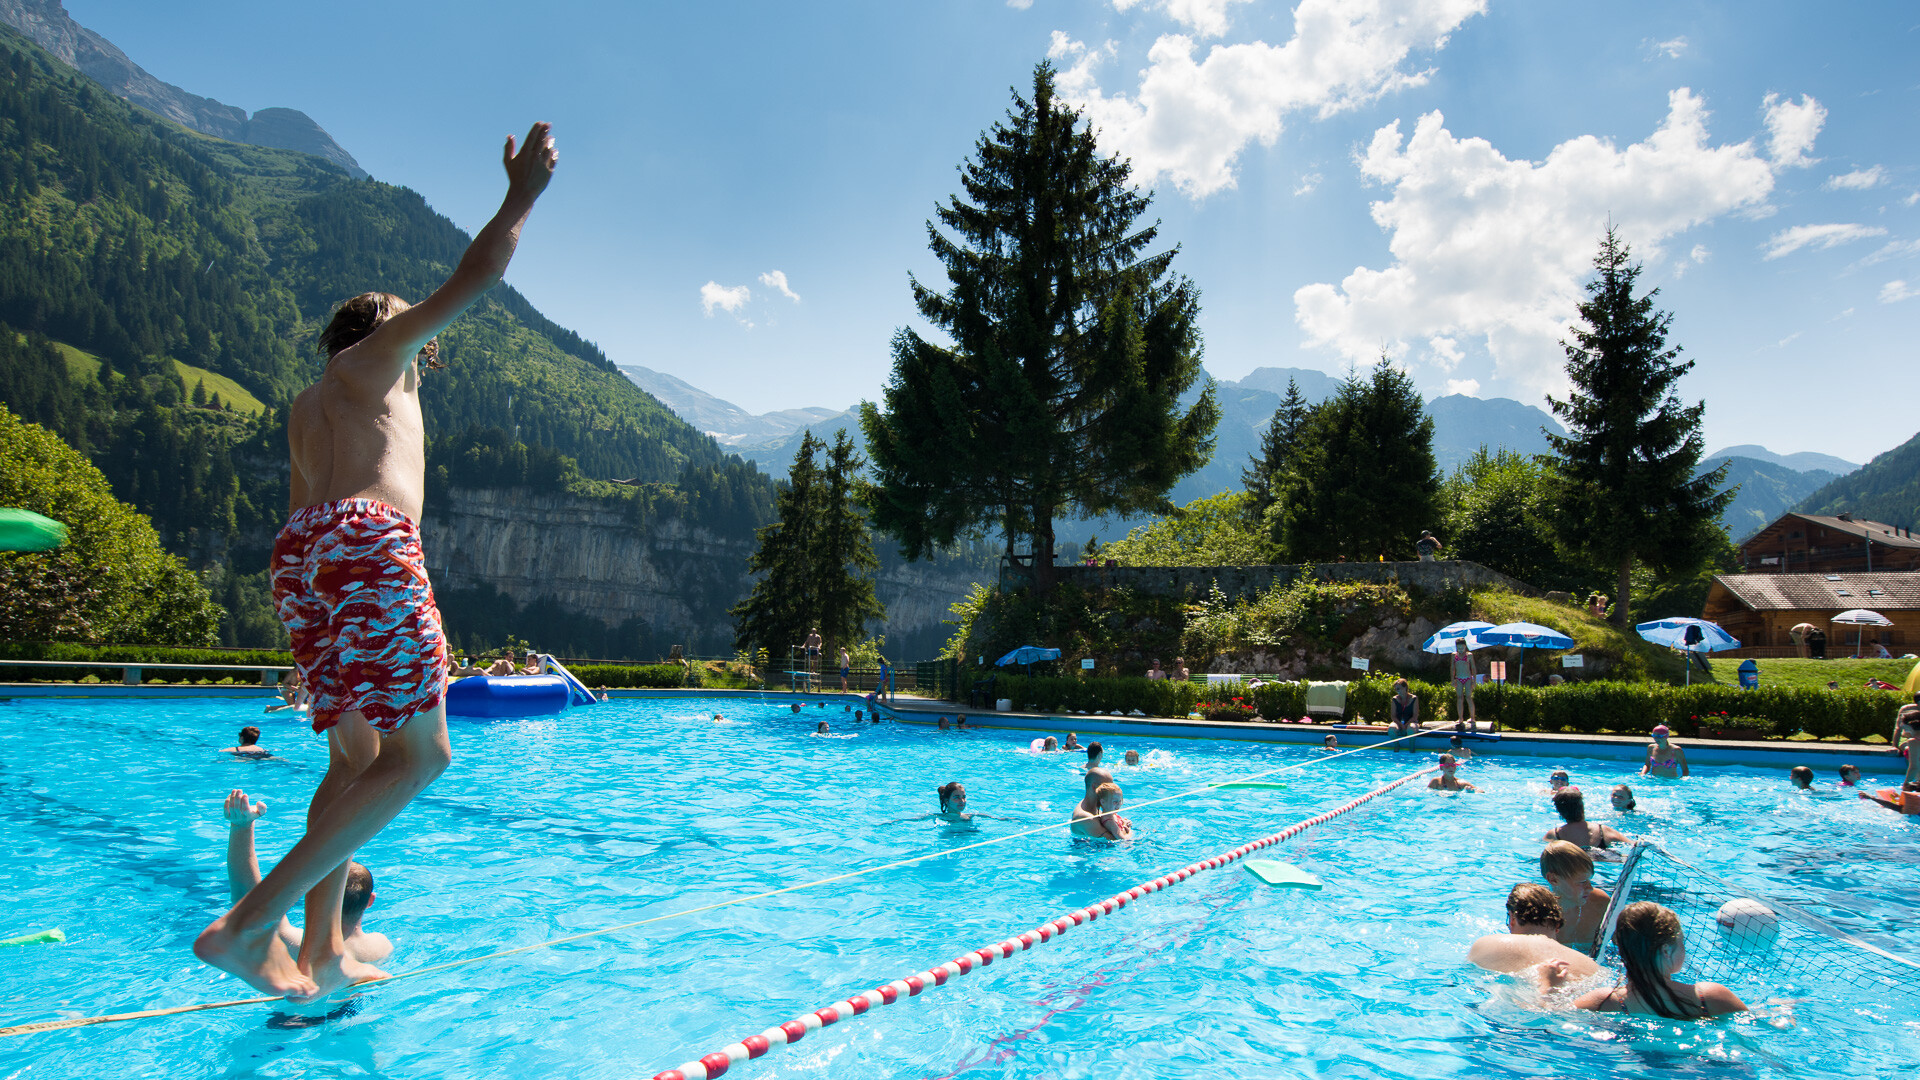 The Champéry Palladium swimming pool, an oasis at the foot of the Dents du Midi.